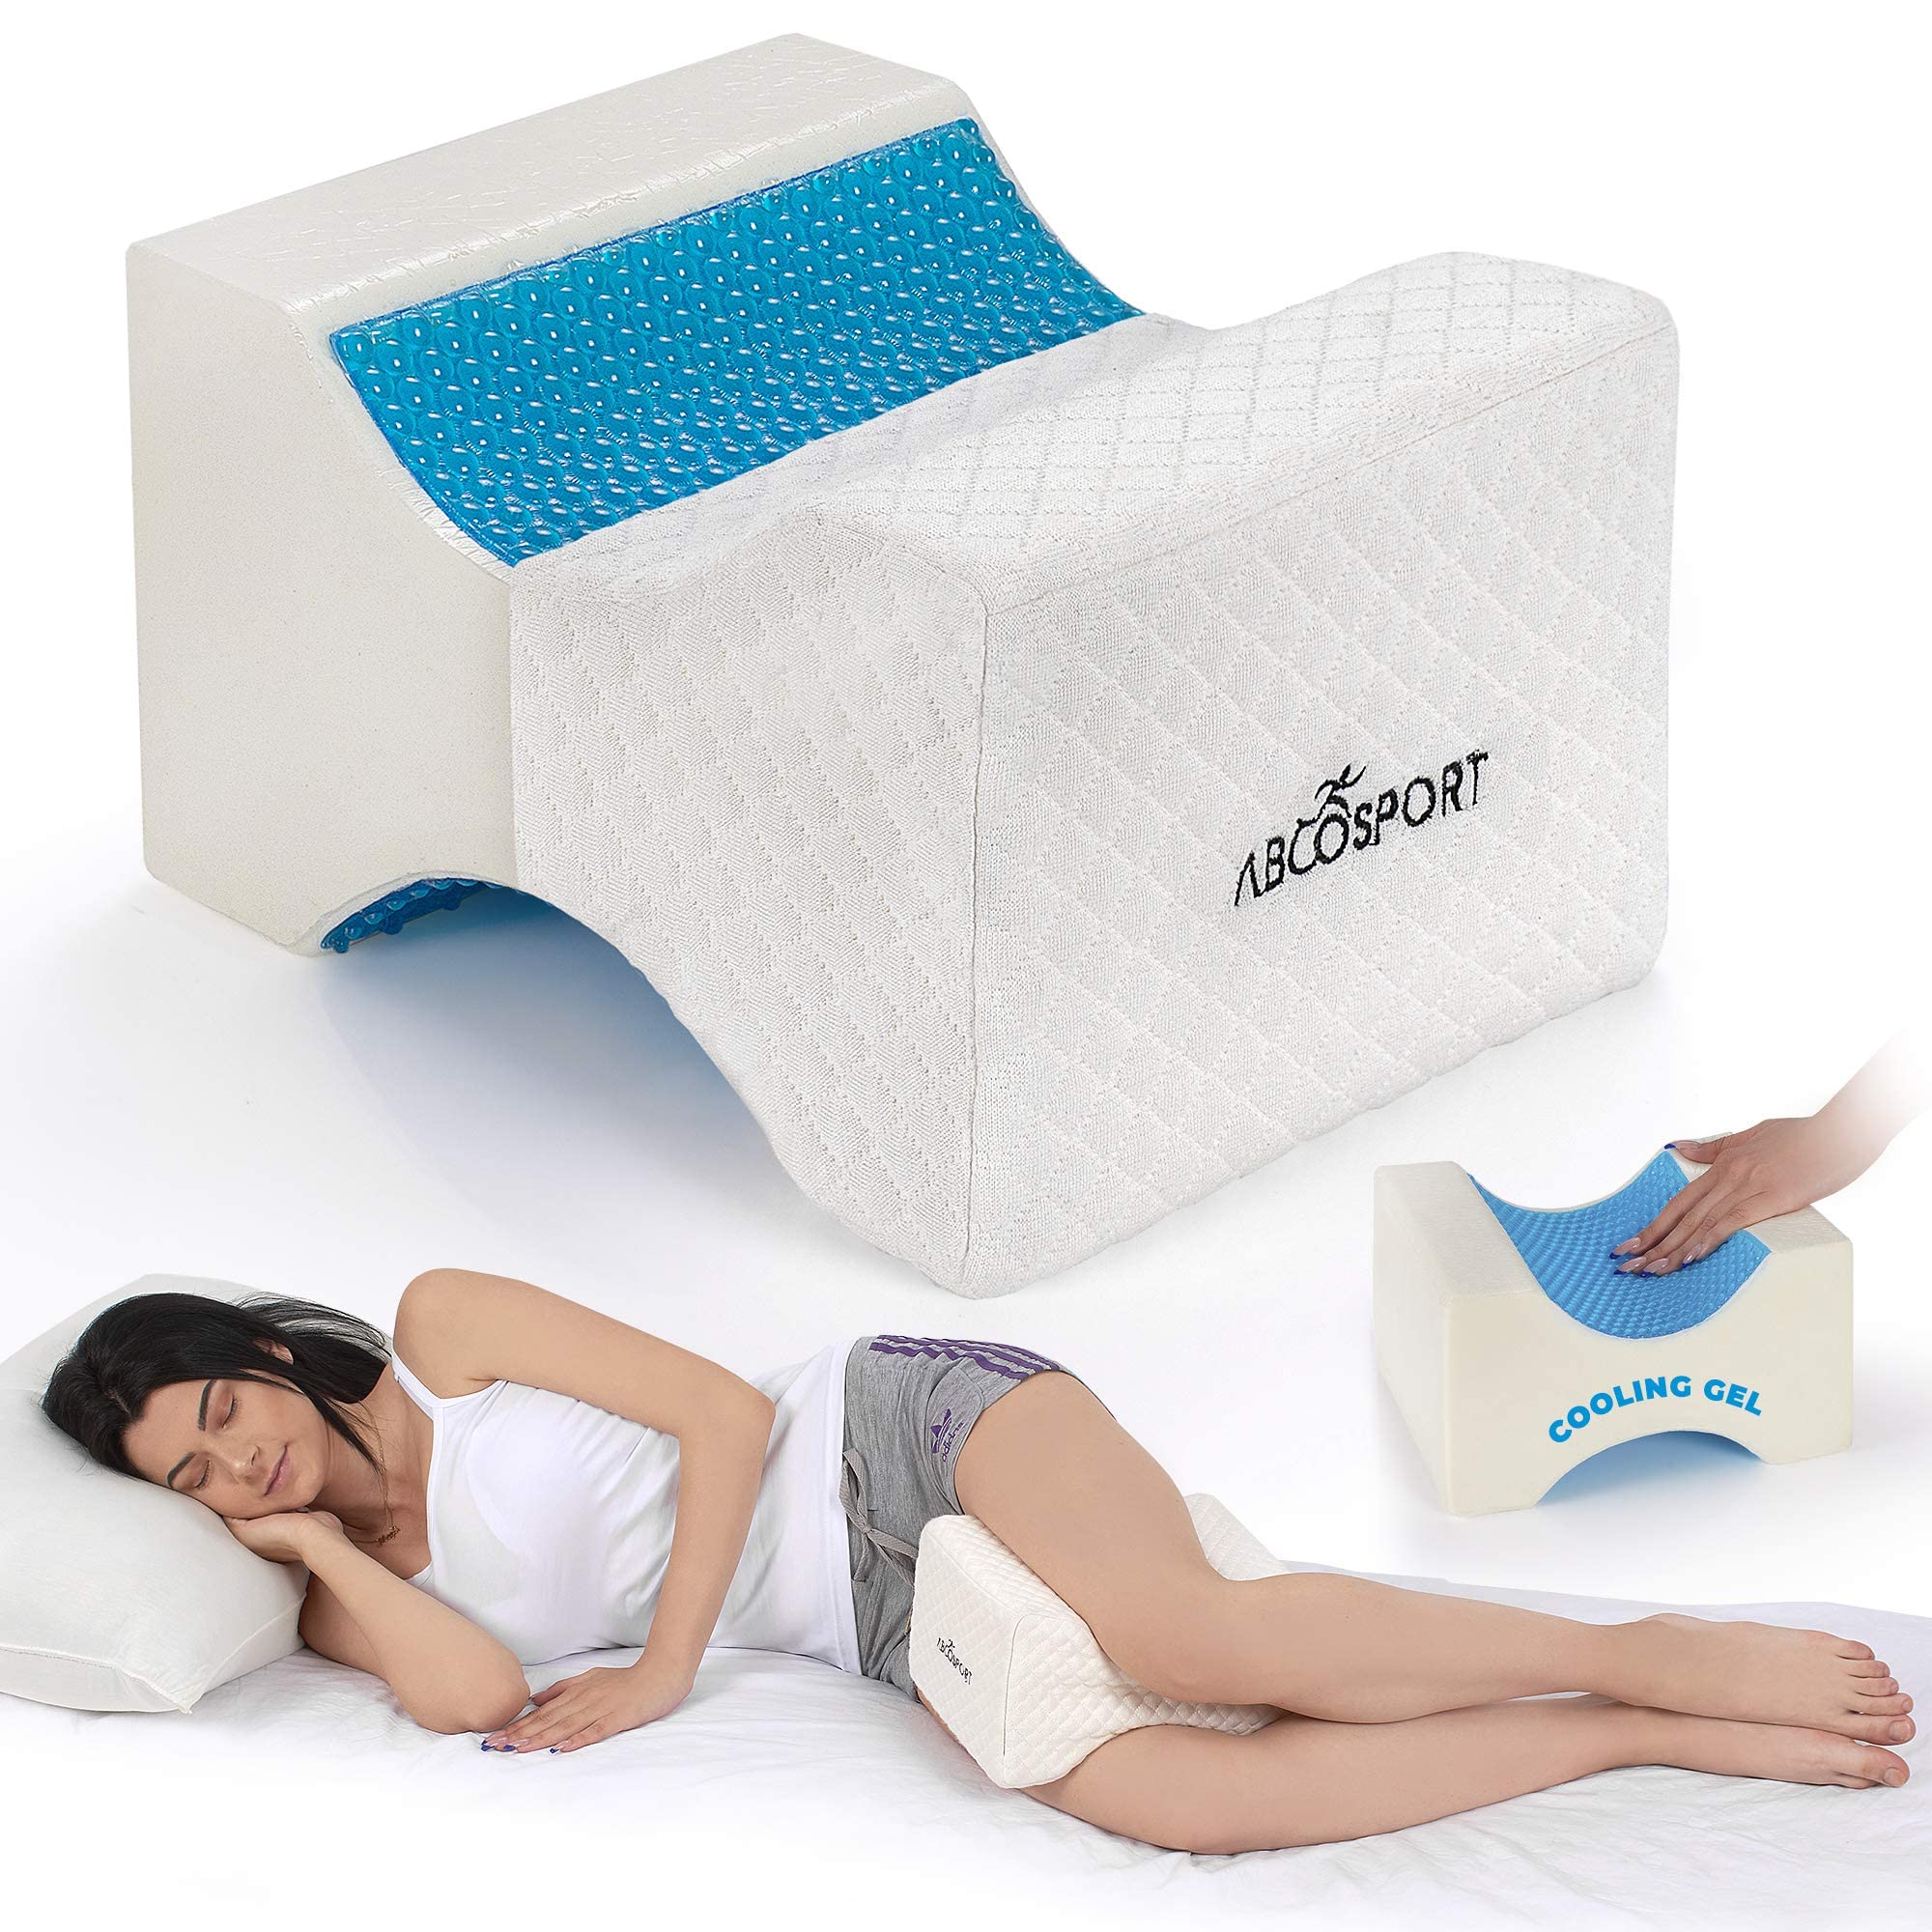 Abco Tech Memory Foam Knee Pillow with Cooling Gel - Knee Wedge Pillow, Leg Pillow for Side Sleepers, Pregnancy, Spine Alignment, Pain Relief - Pillow for Between Knees While Sleeping + Washable Cover  - Acceptable